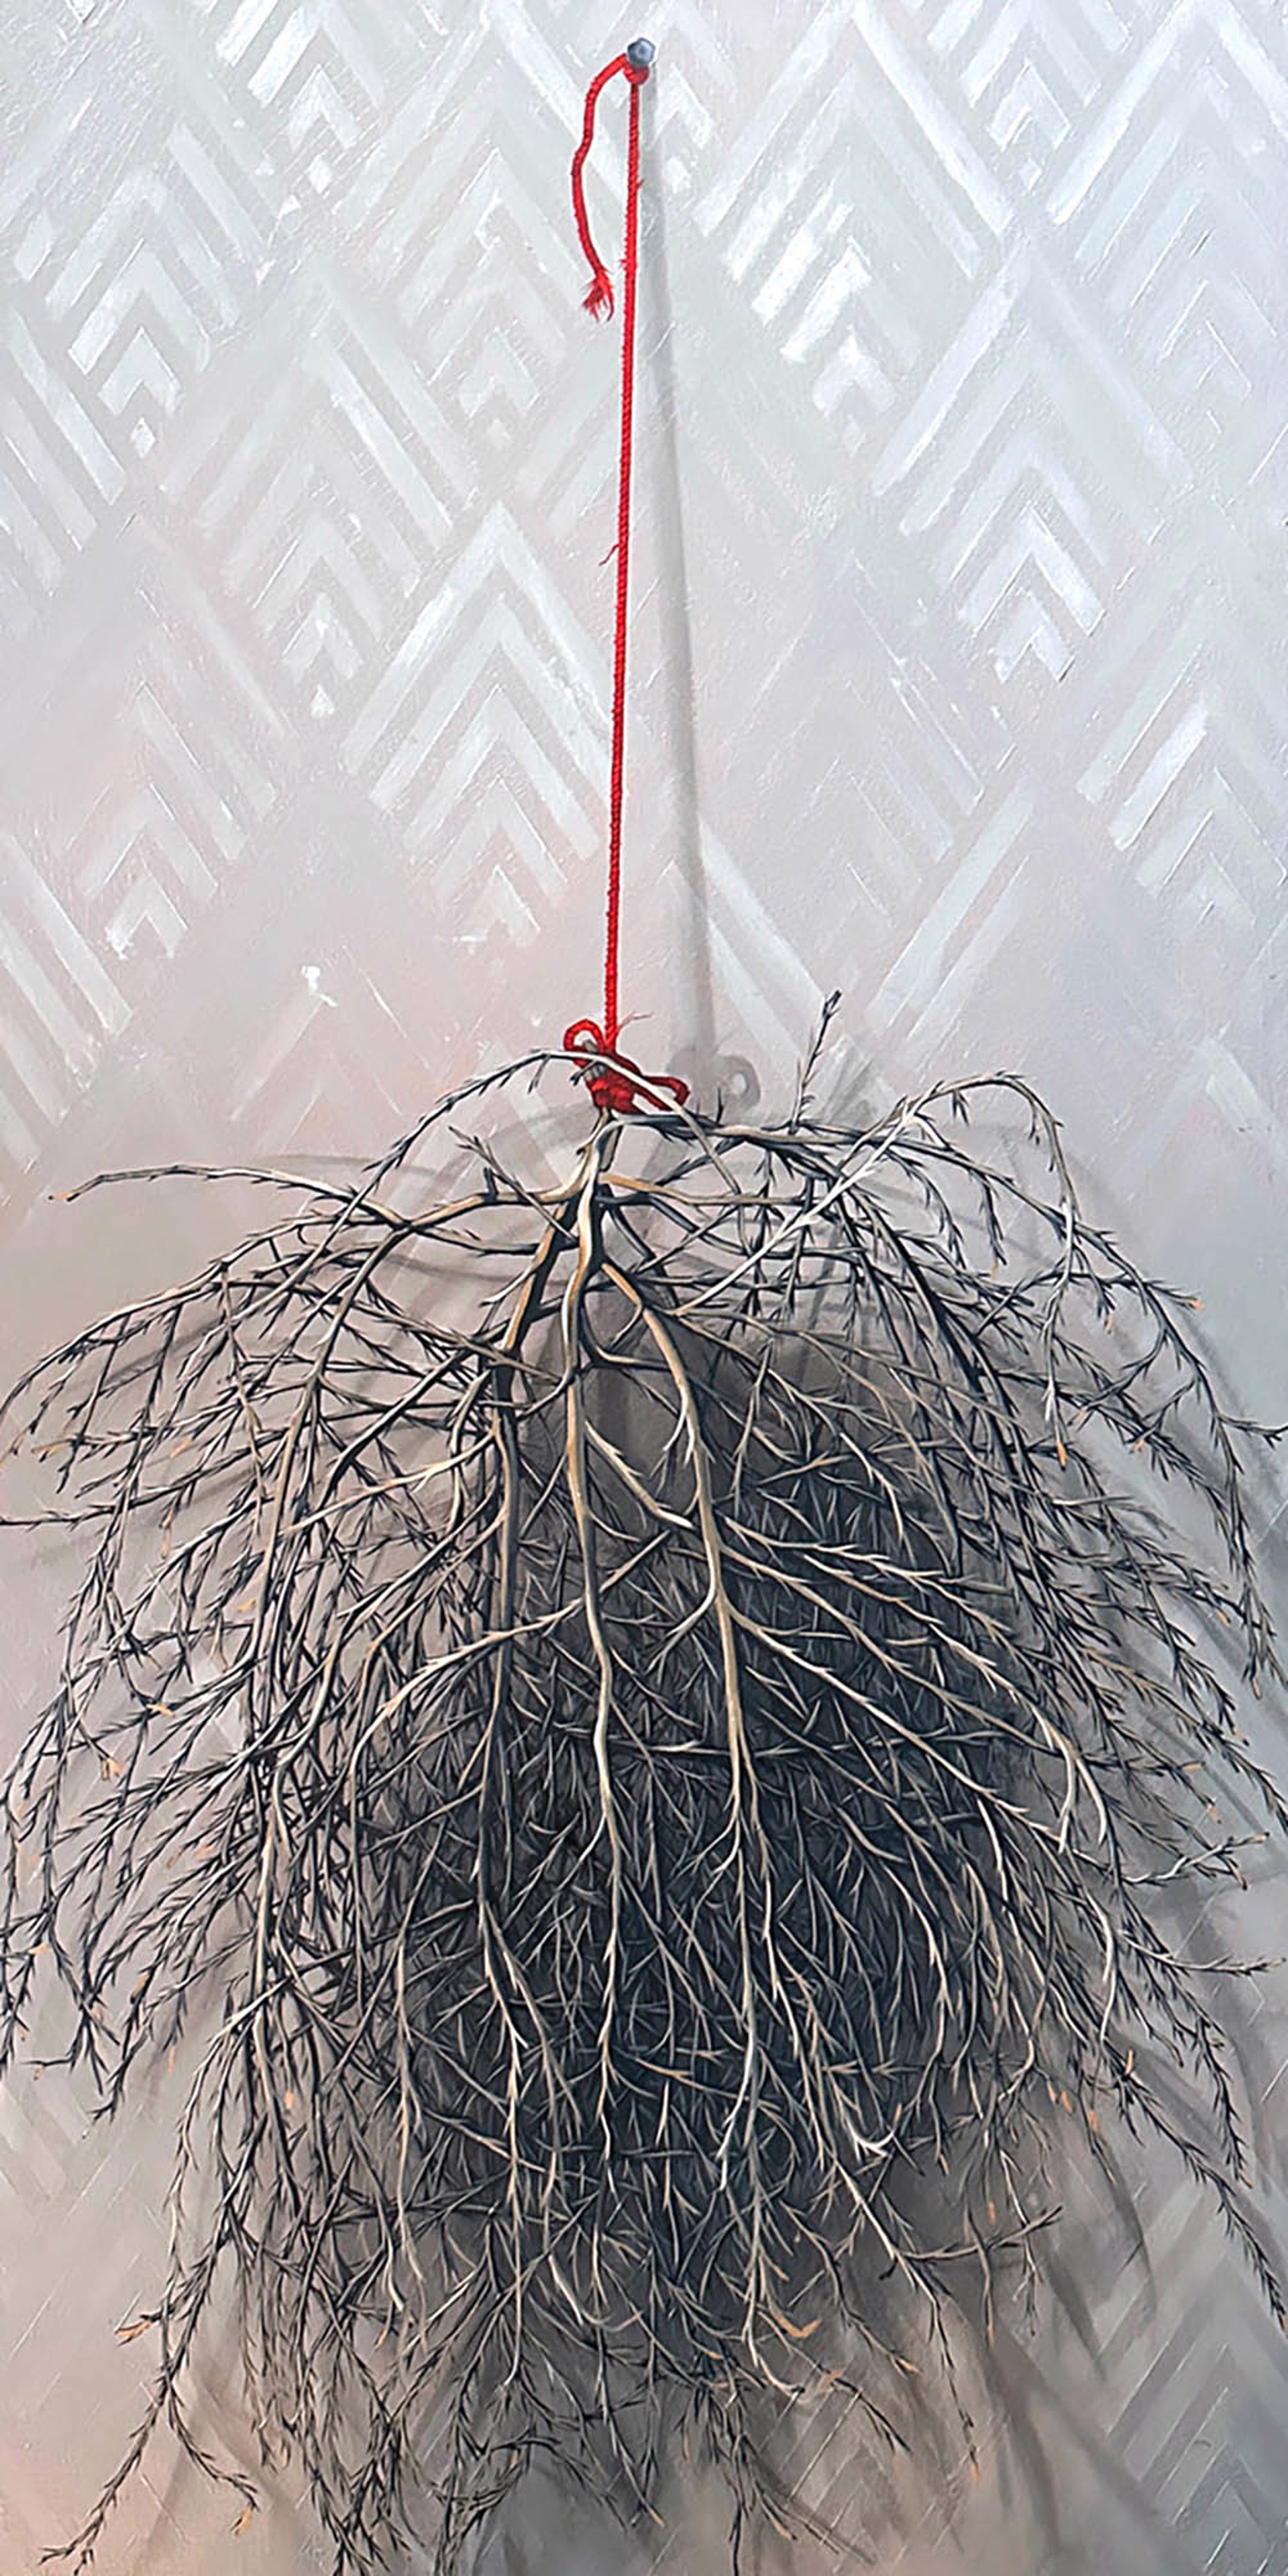 Original Painting by Christy Stallop Featuring a Tumbleweed Hanging on a Printed Background